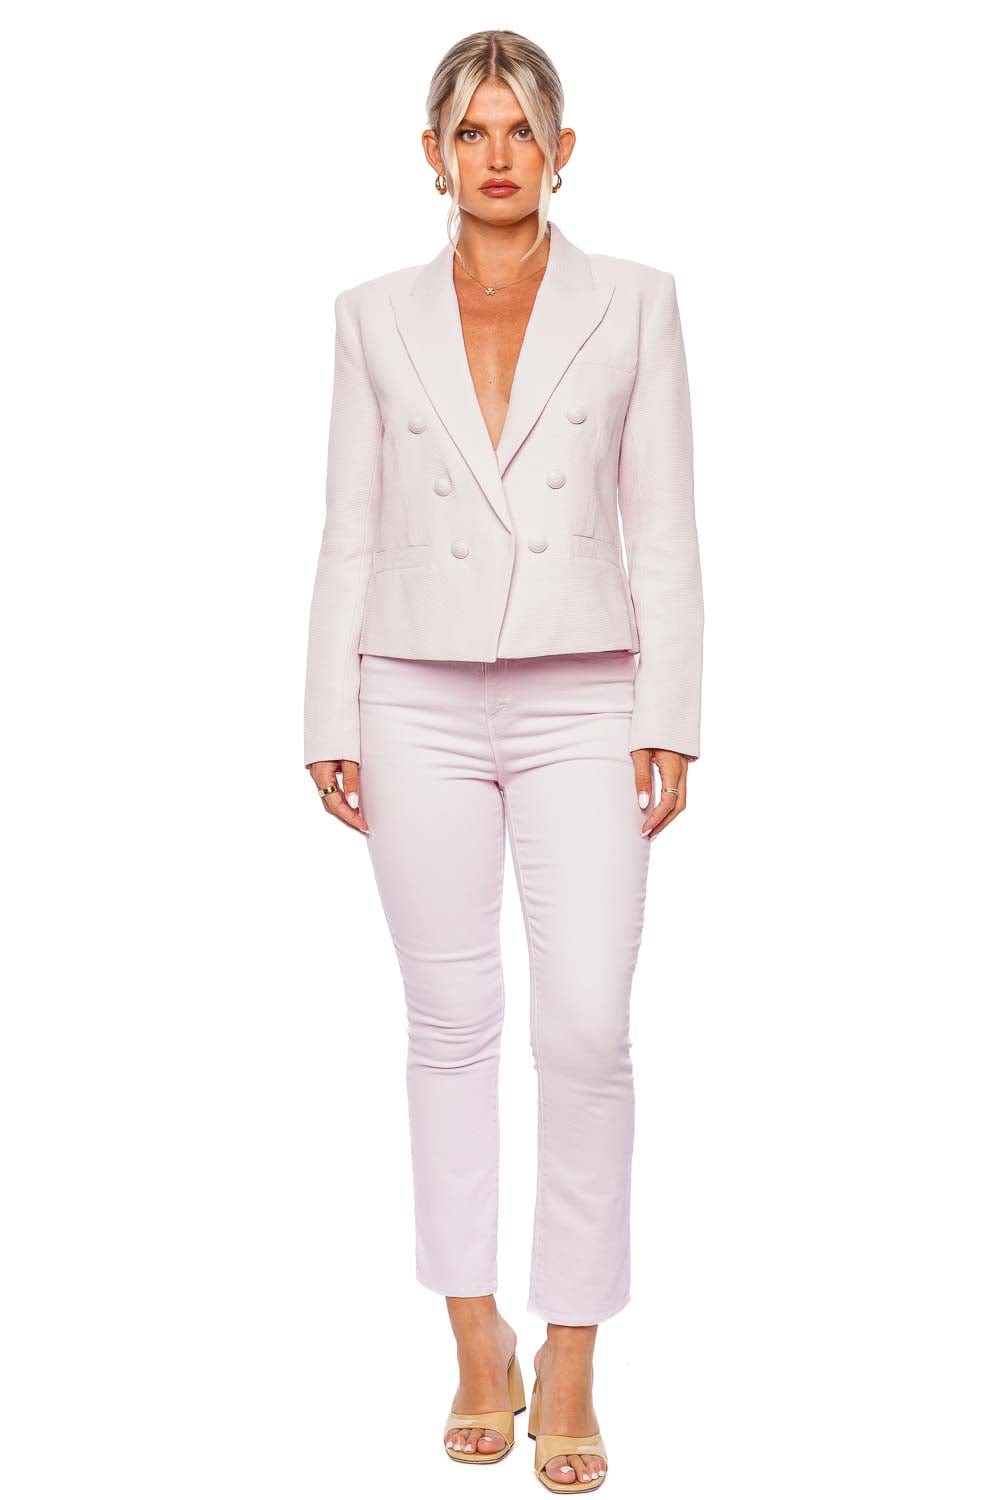 L'AGENCE Brooke Lilac Snow Double Breasted Blazer